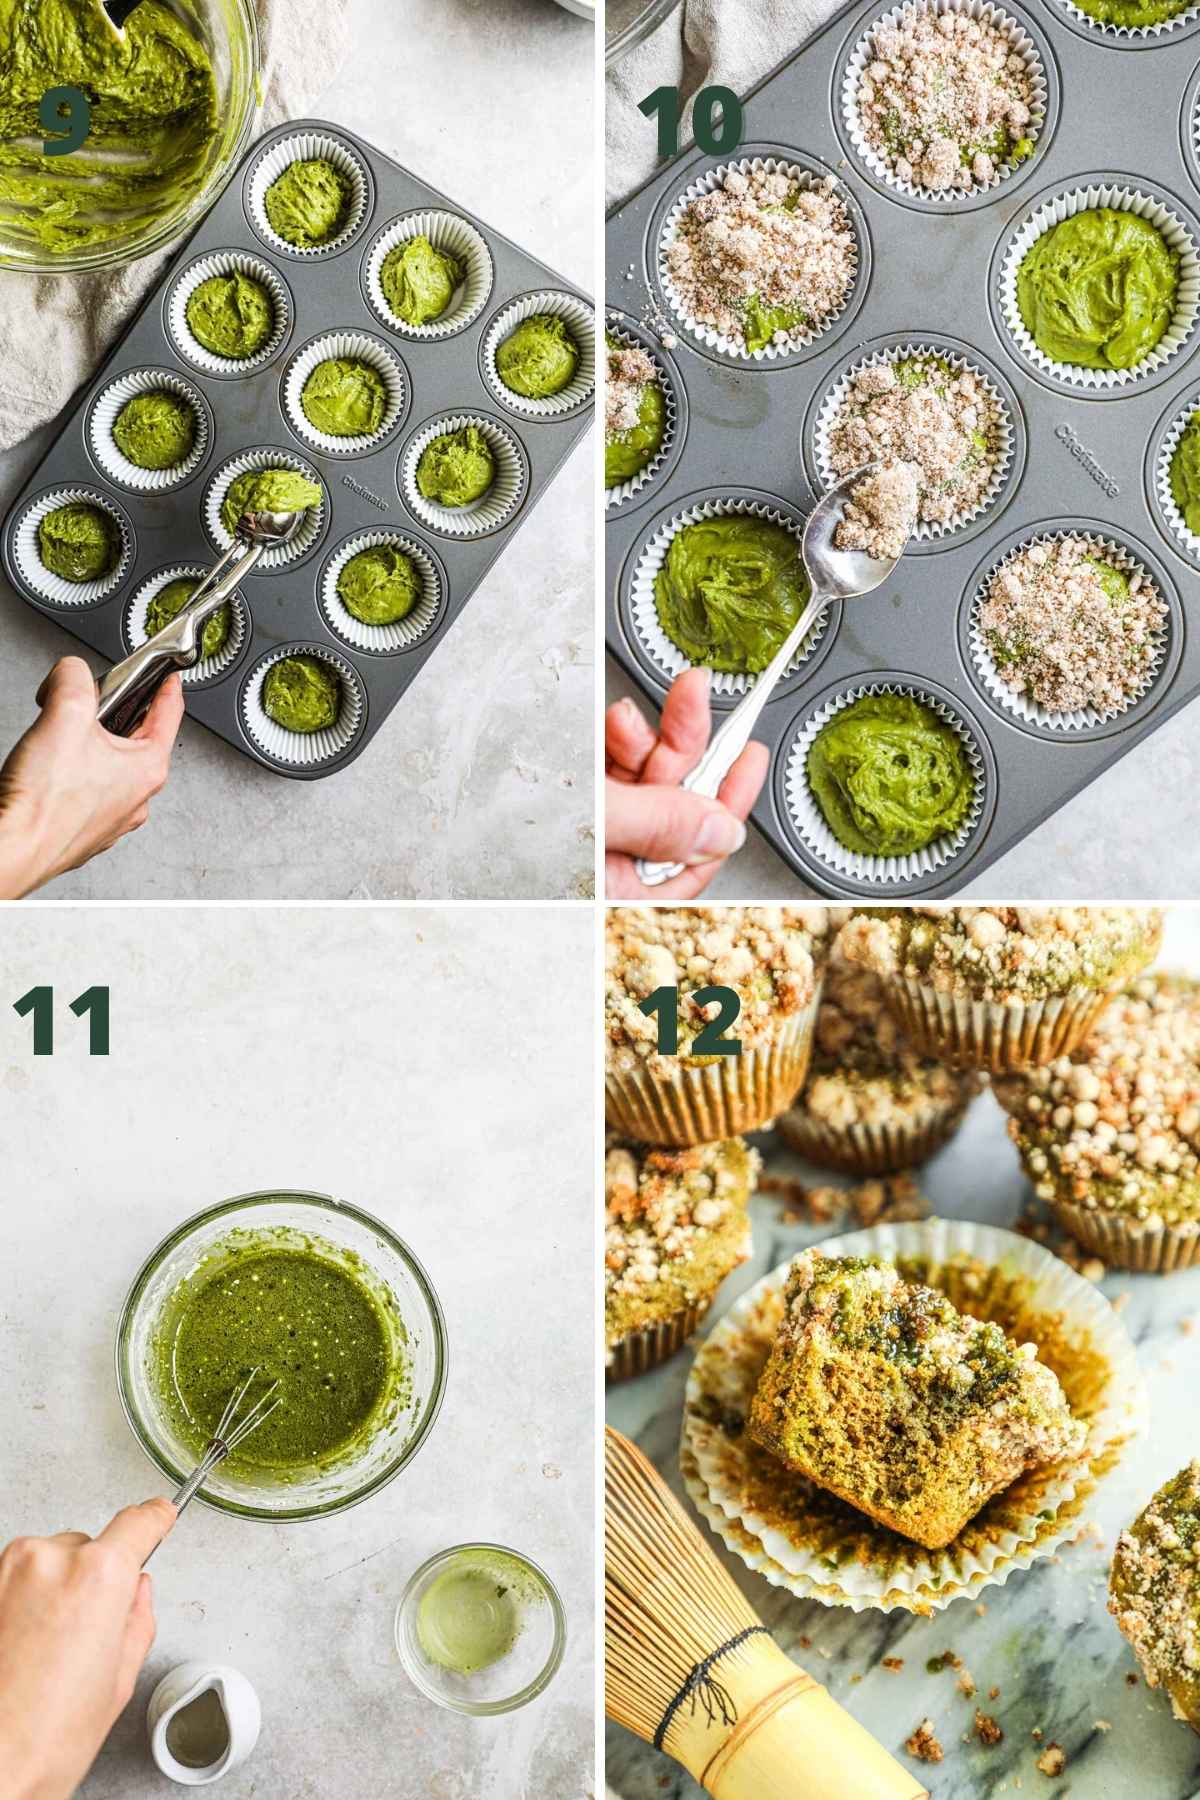 Steps to make matcha streusel muffins, including adding the batter to the muffin liners, adding the cinnamon streusel on top of the batter, baking the muffins, making the matcha vanilla glaze, and adding the glaze to the muffins.